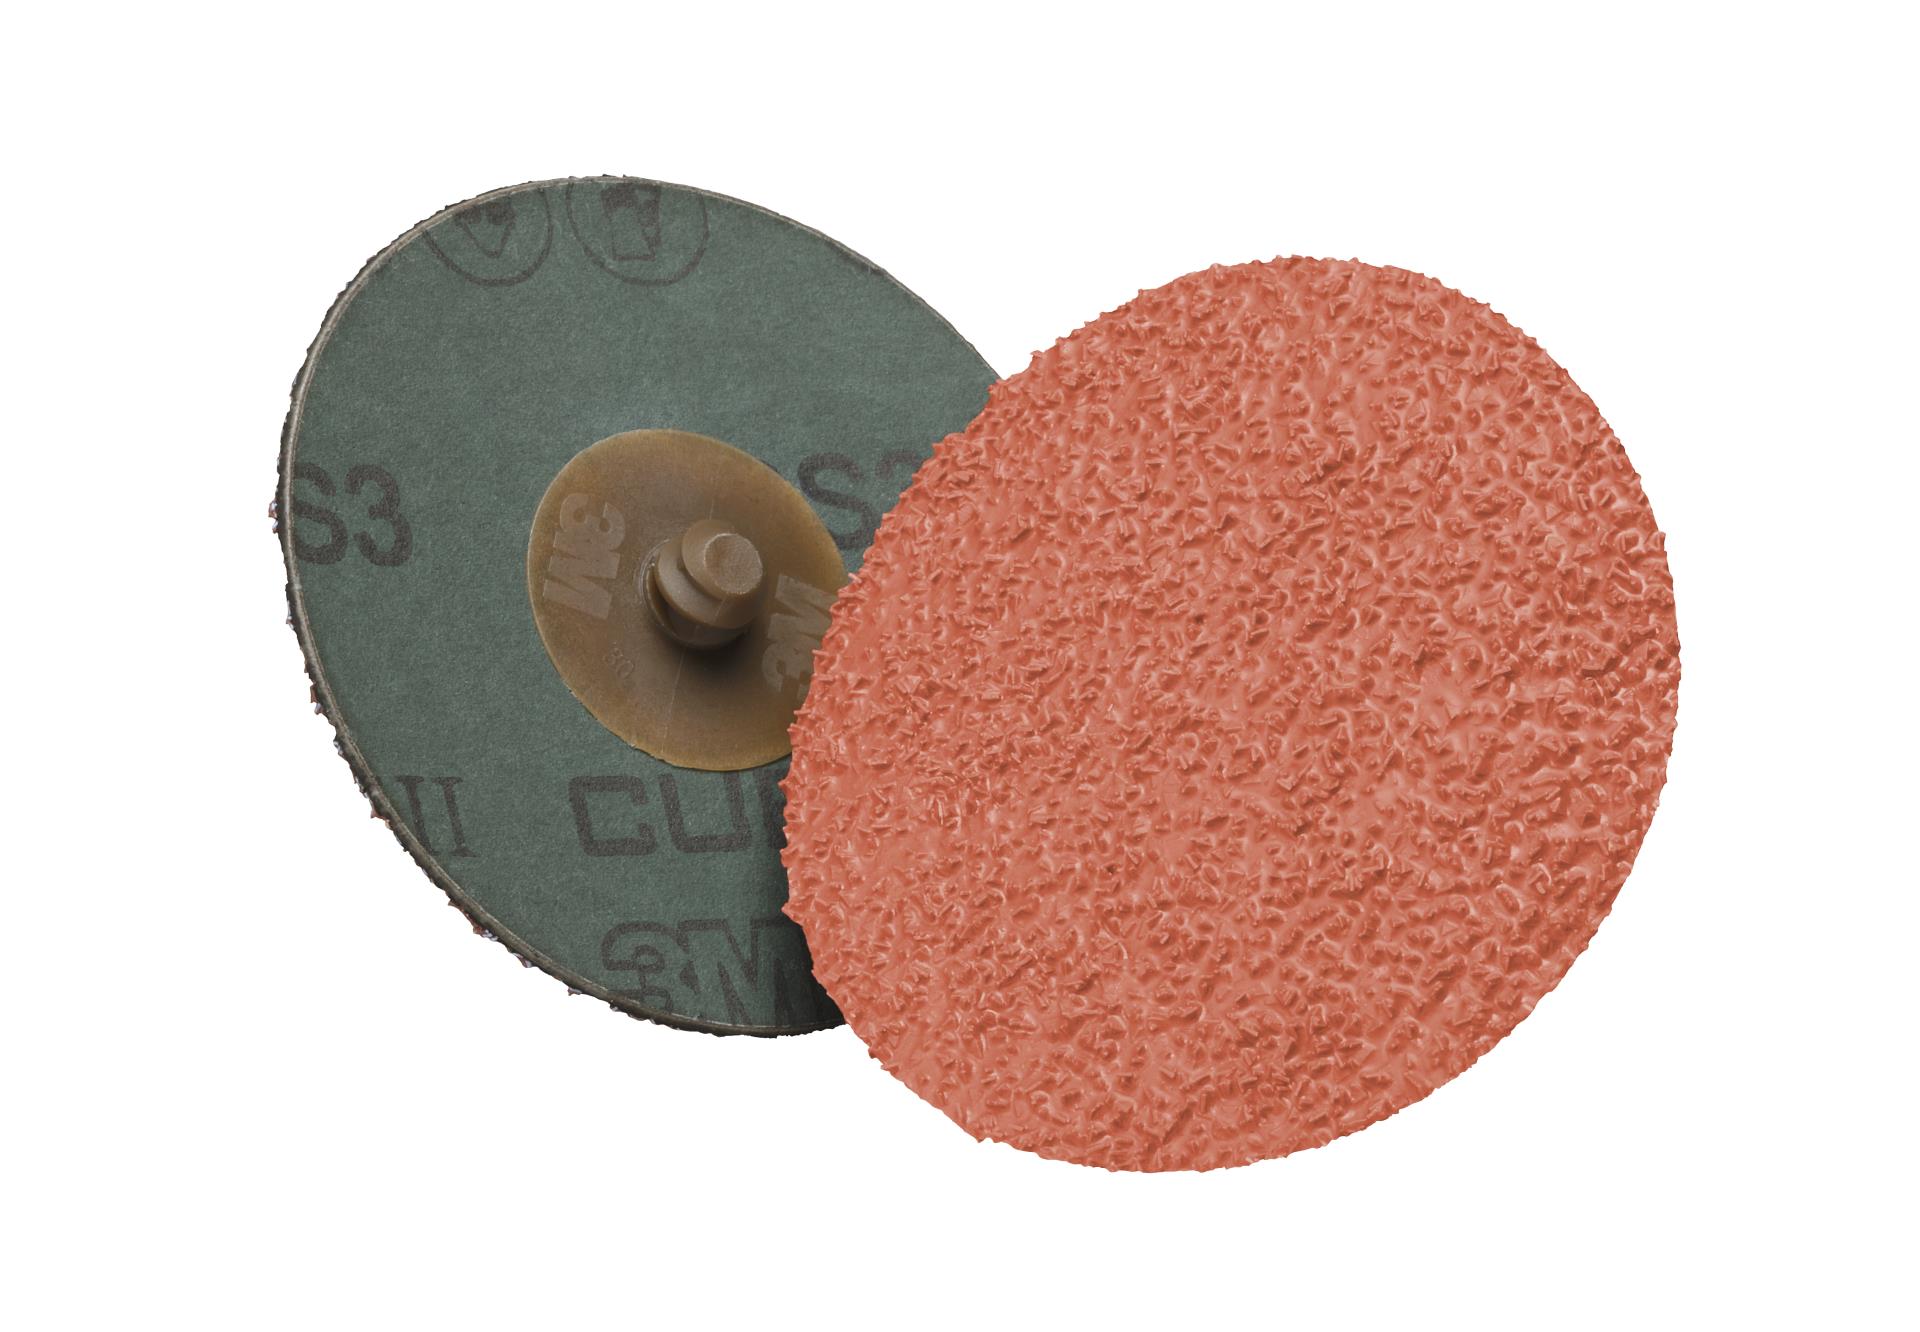 Polycarbide Abrasive Disc Silicone Grinding 115mm 22.23mm Bore 